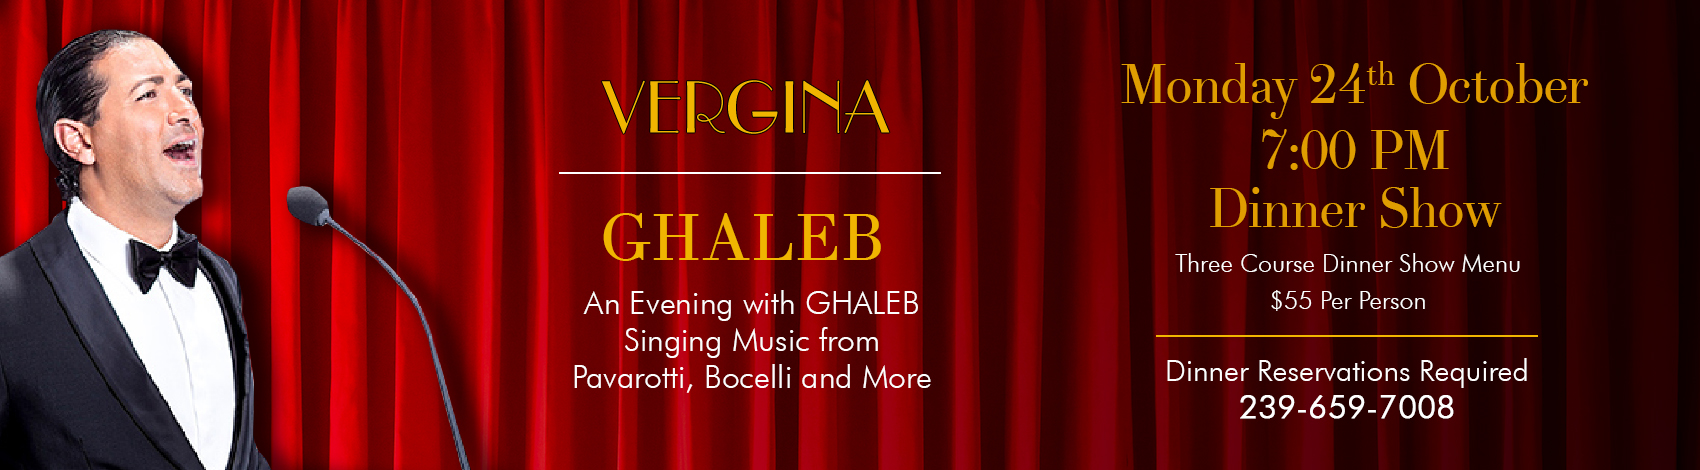 An Evening with GHALEB Singing Music from Pavarotti, Bocelli and More Monday 24th October 7:00 PM Dinner Show Three Course Dinner Show Menu $55 Per Person